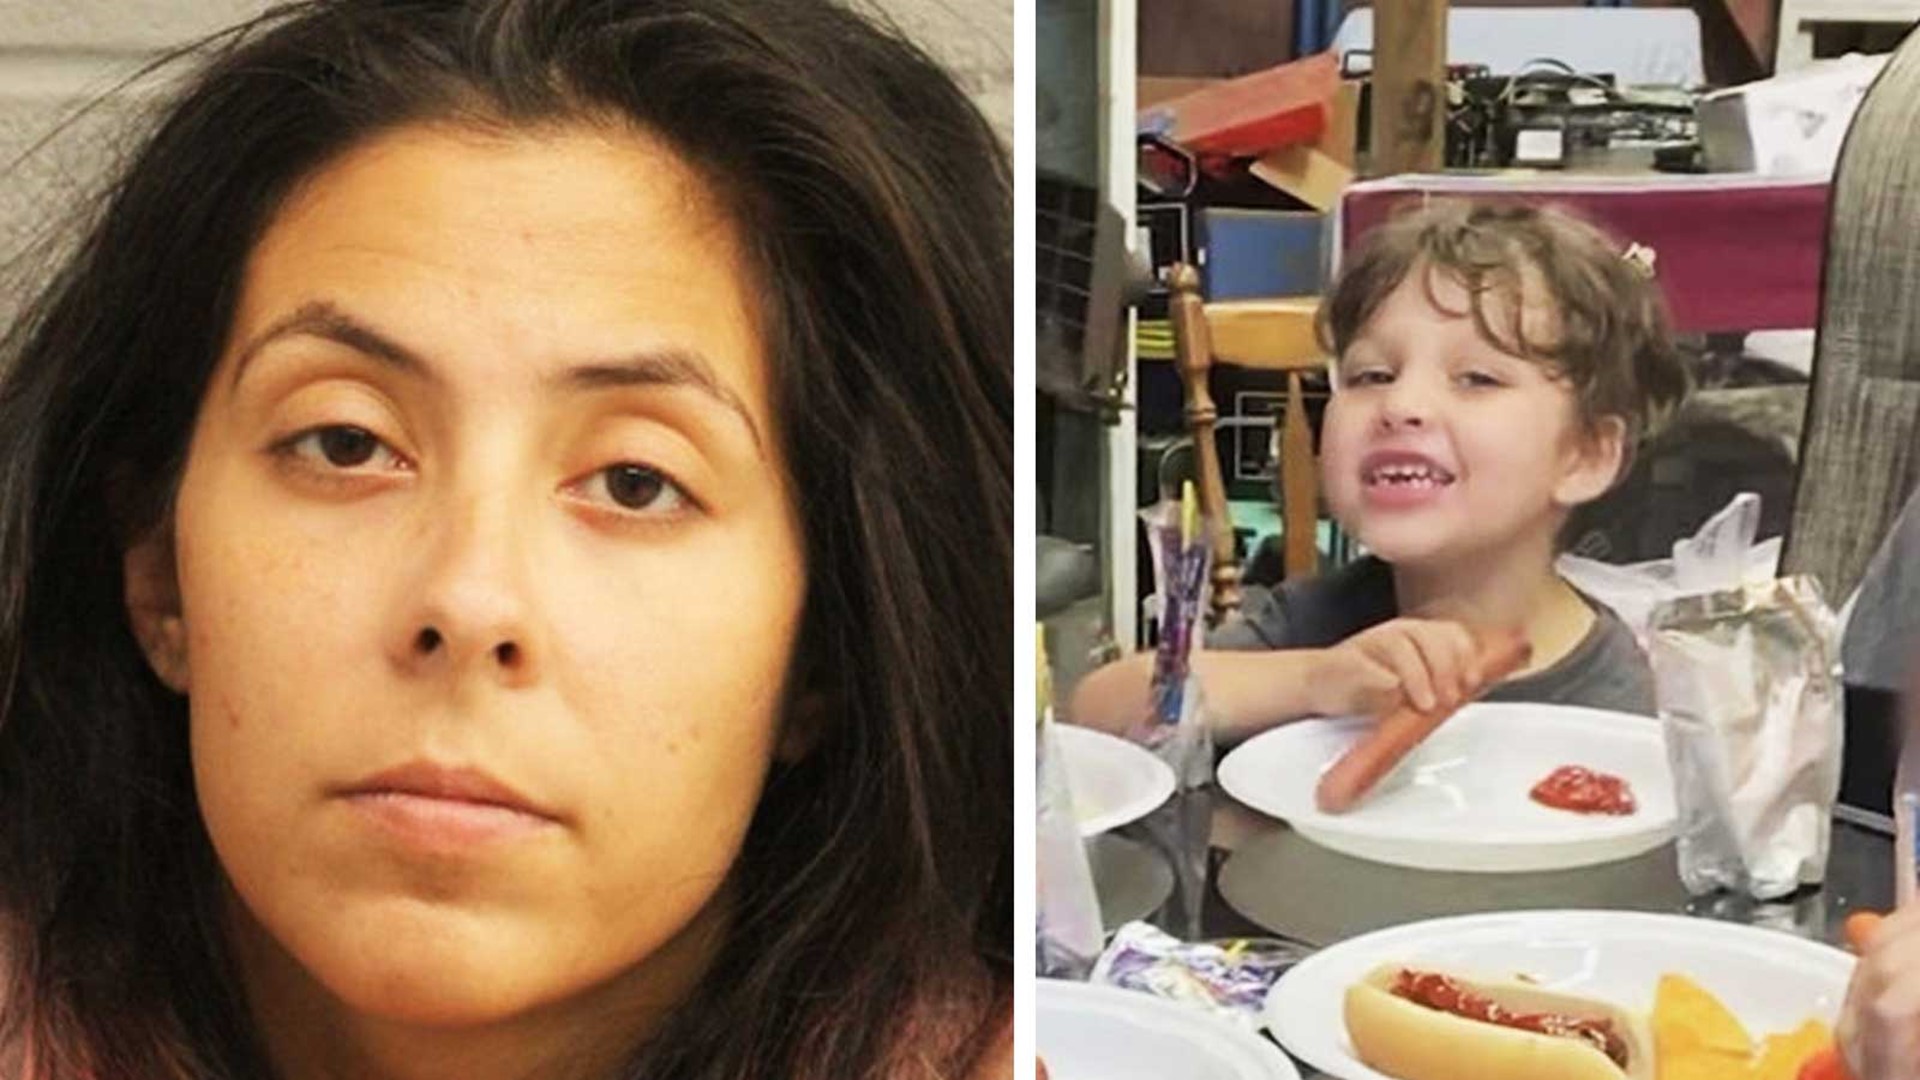 Theresa Balboa has been charged with capital murder in the death of 5-year-old Samuel Olson, according to the Harris County District Attorney’s Office.